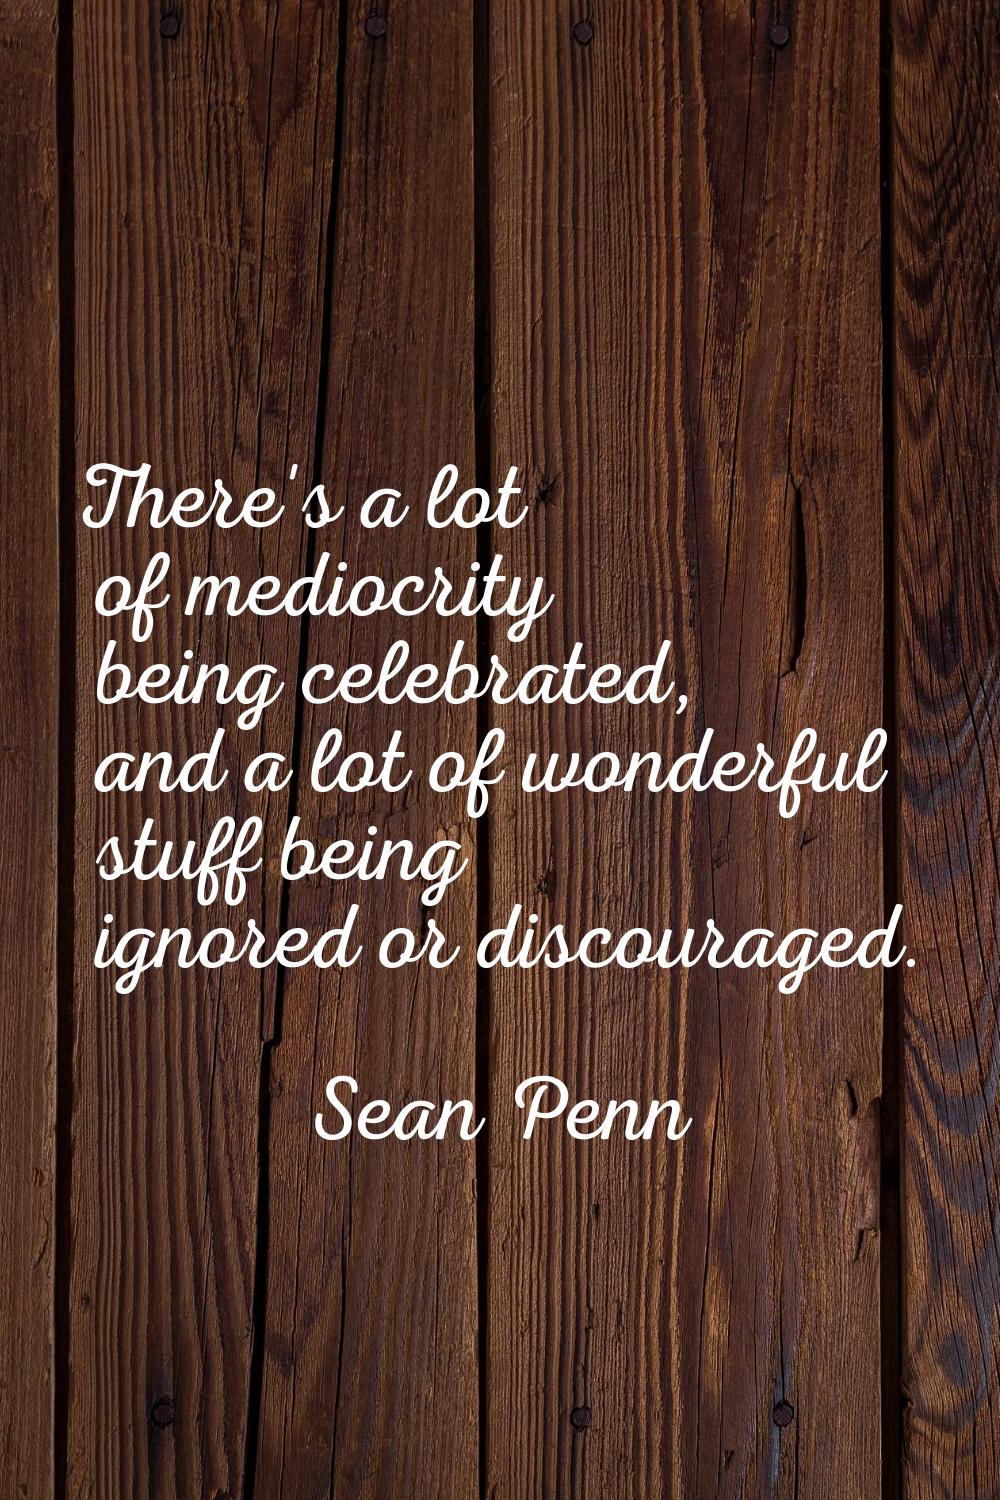 There's a lot of mediocrity being celebrated, and a lot of wonderful stuff being ignored or discour